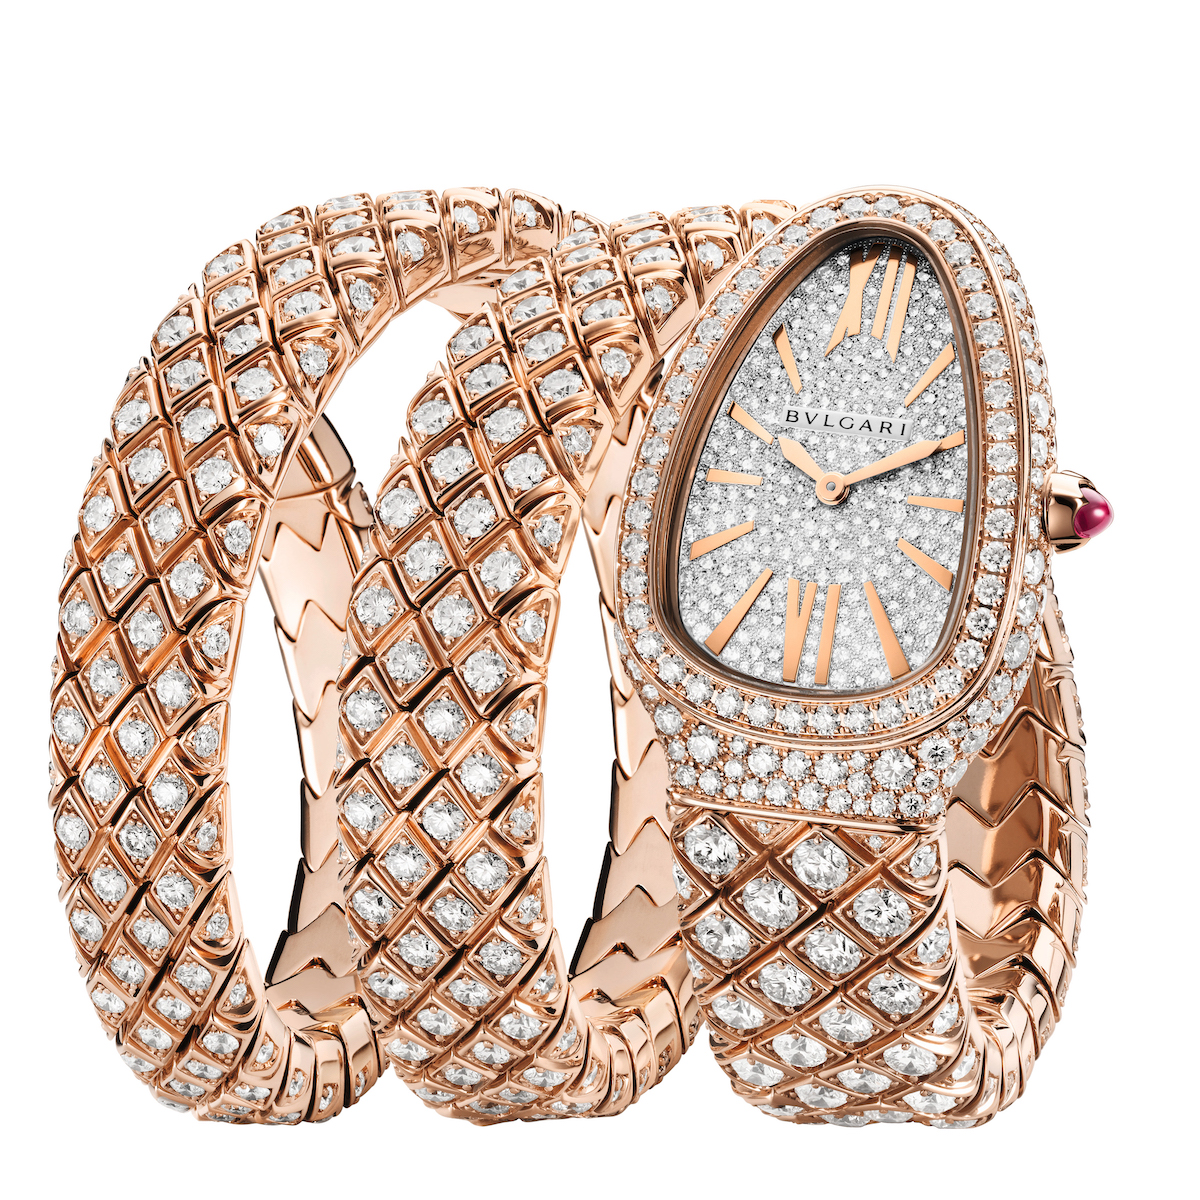 natural diamond jewelry holiday gifts watches